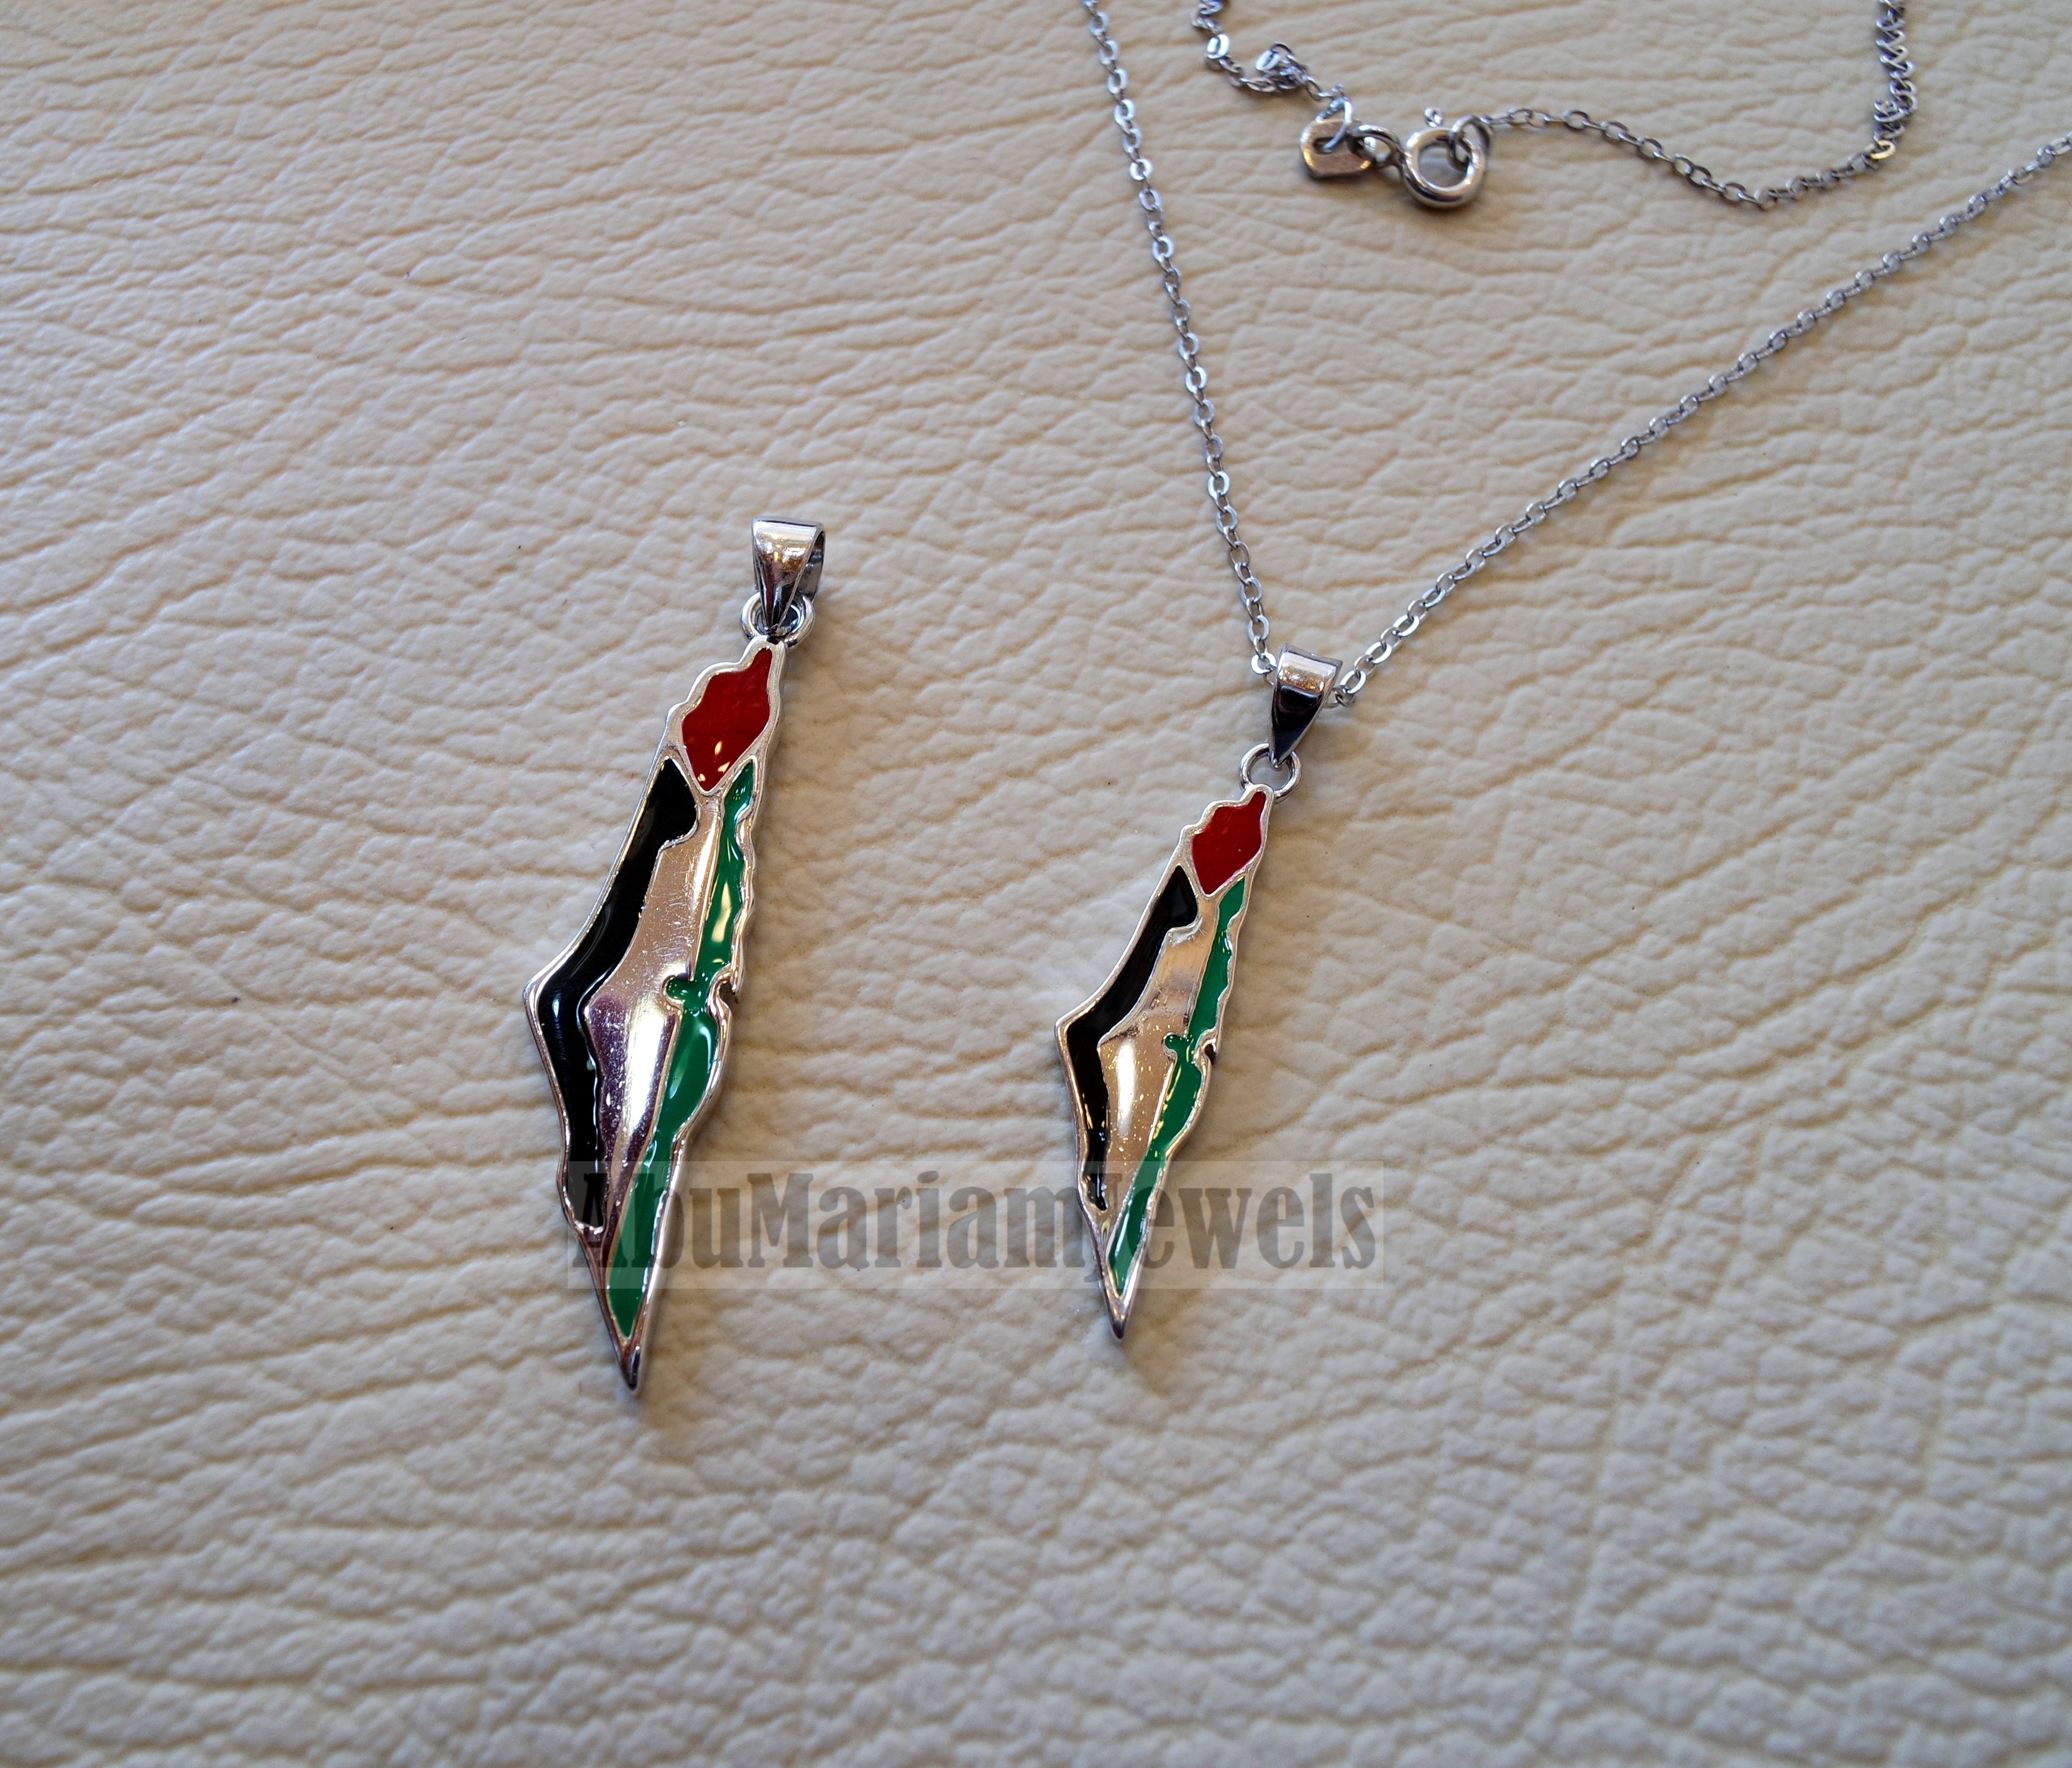 Palestine map pendant with flag colors enamel & sterling silver 925 k high quality jewelry arabic fast shipping خارطه و علم فلسطين